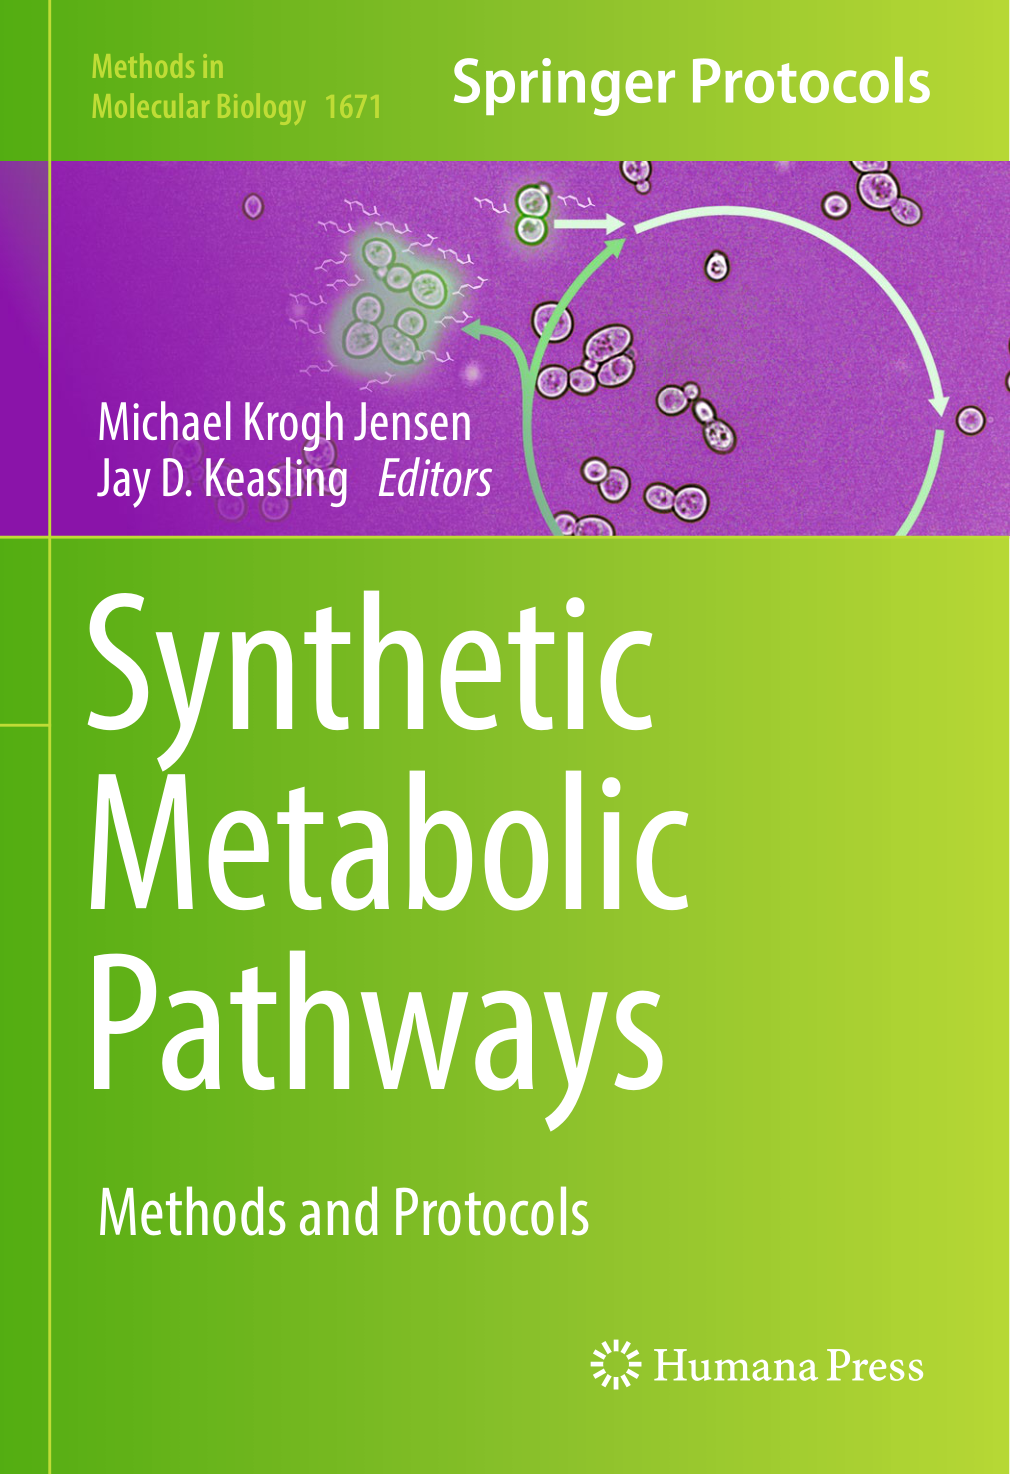 Synthetic Metabolic Pathways.png